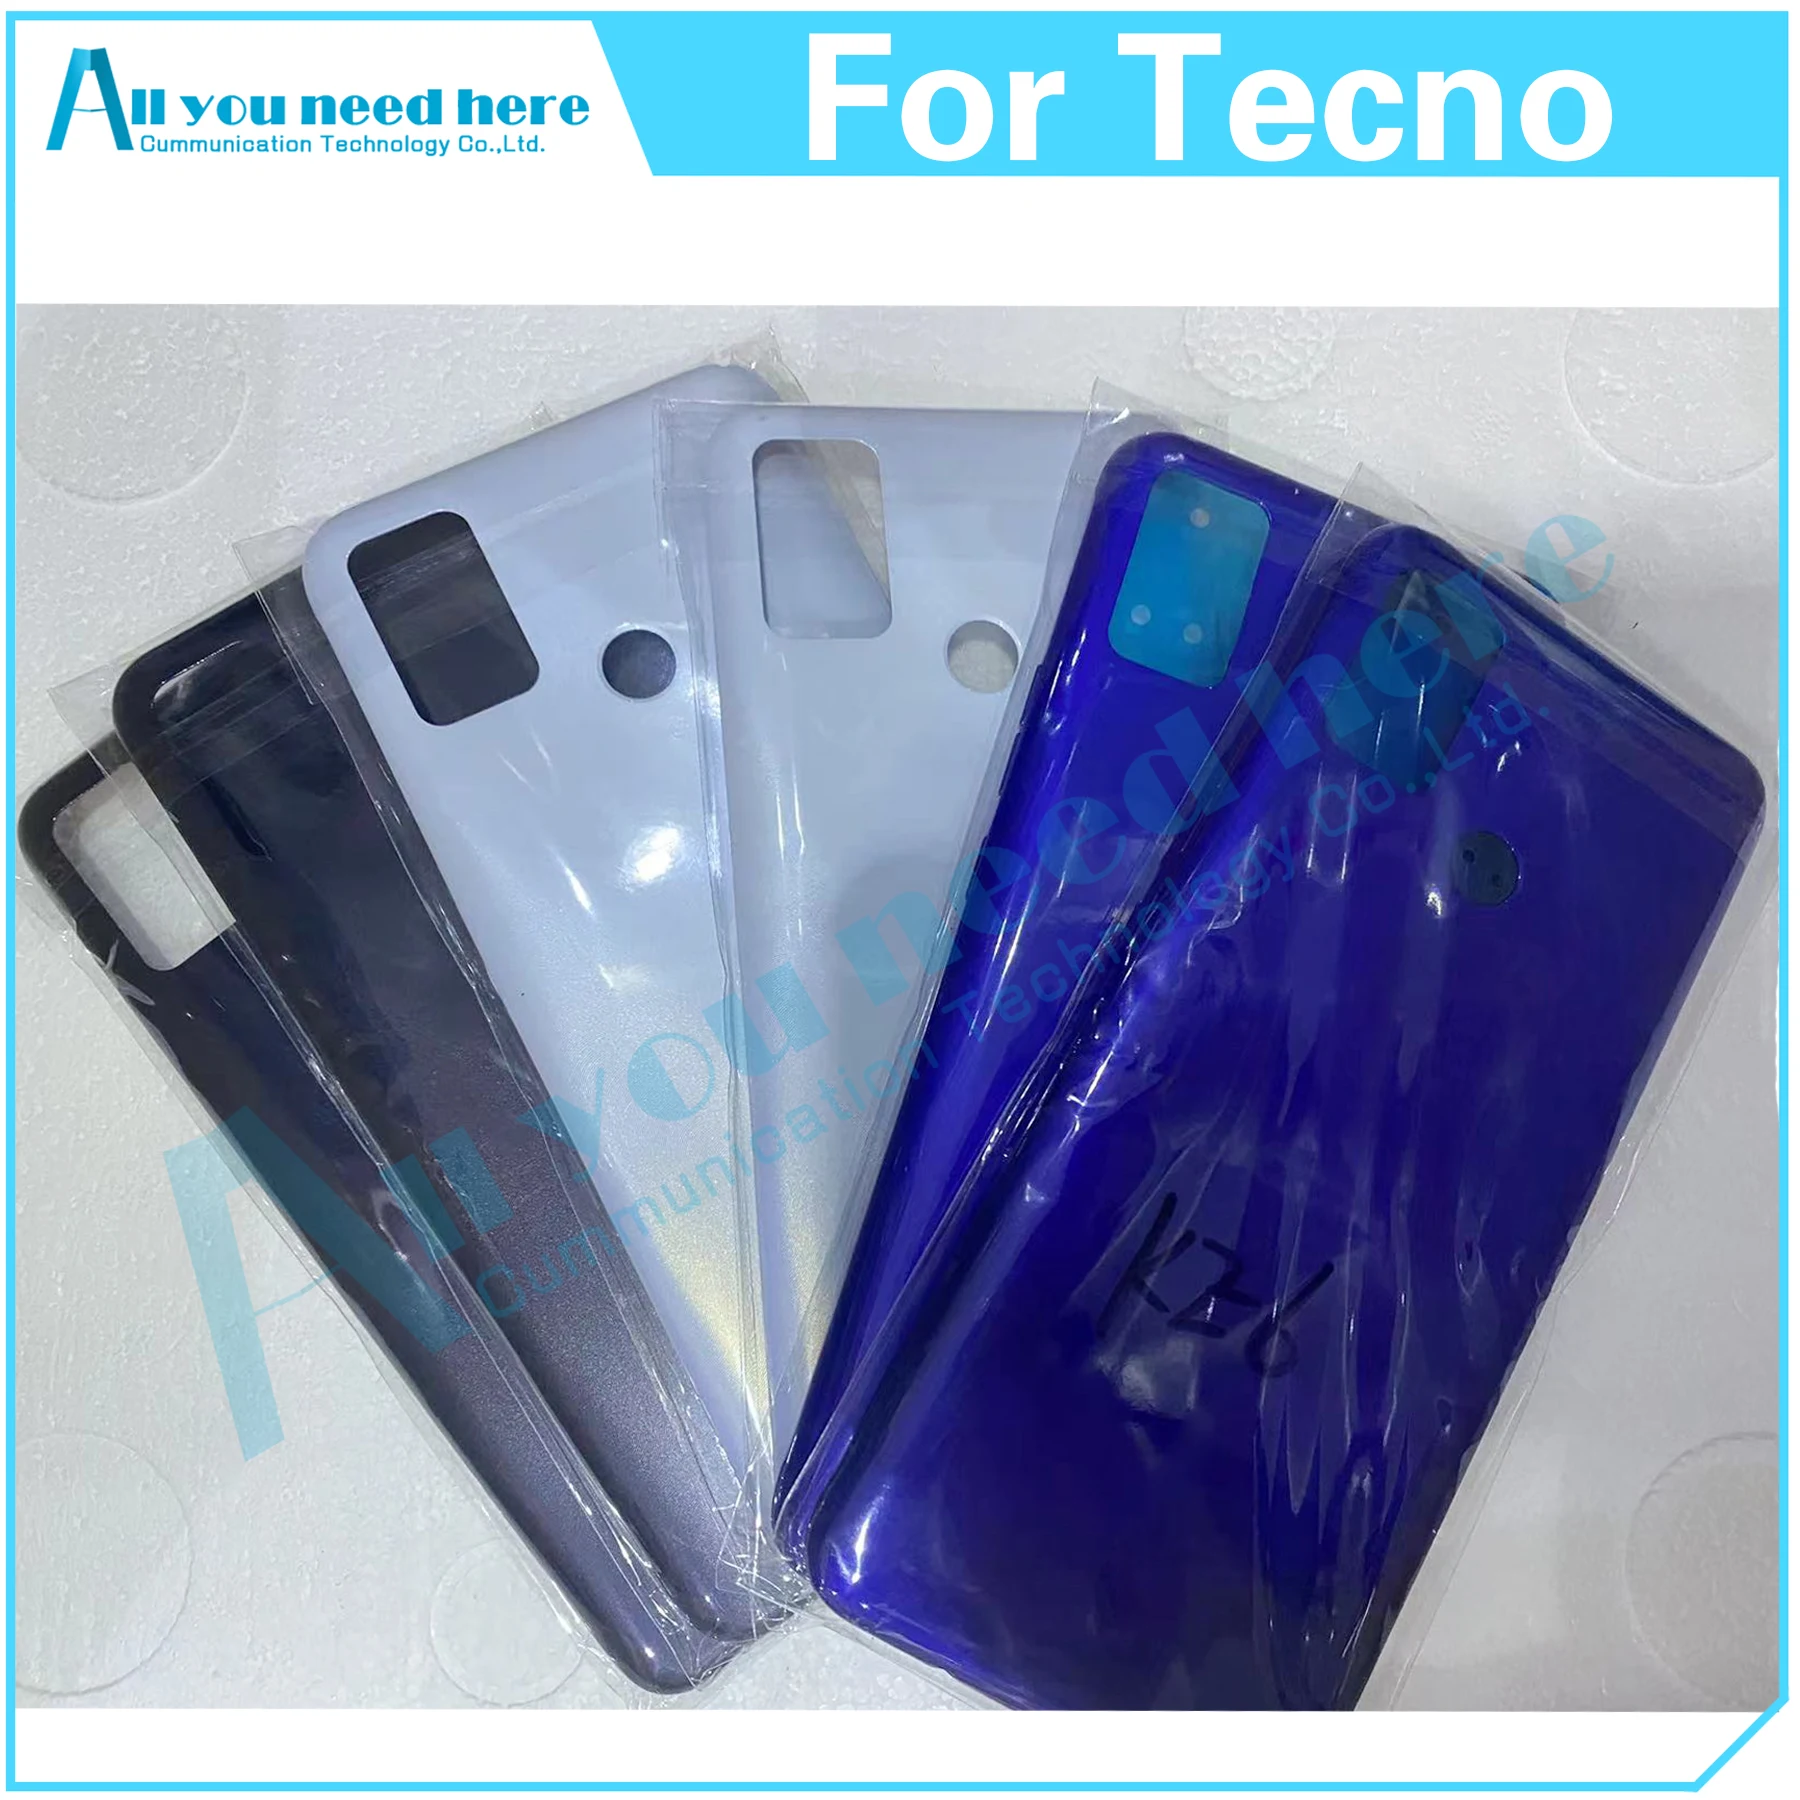 

7.0 Inch For Tecno Spark 6 Air KE6 Back Cover Door Housing Case Rear Cover Battery Cover For Spark6Air Replacement